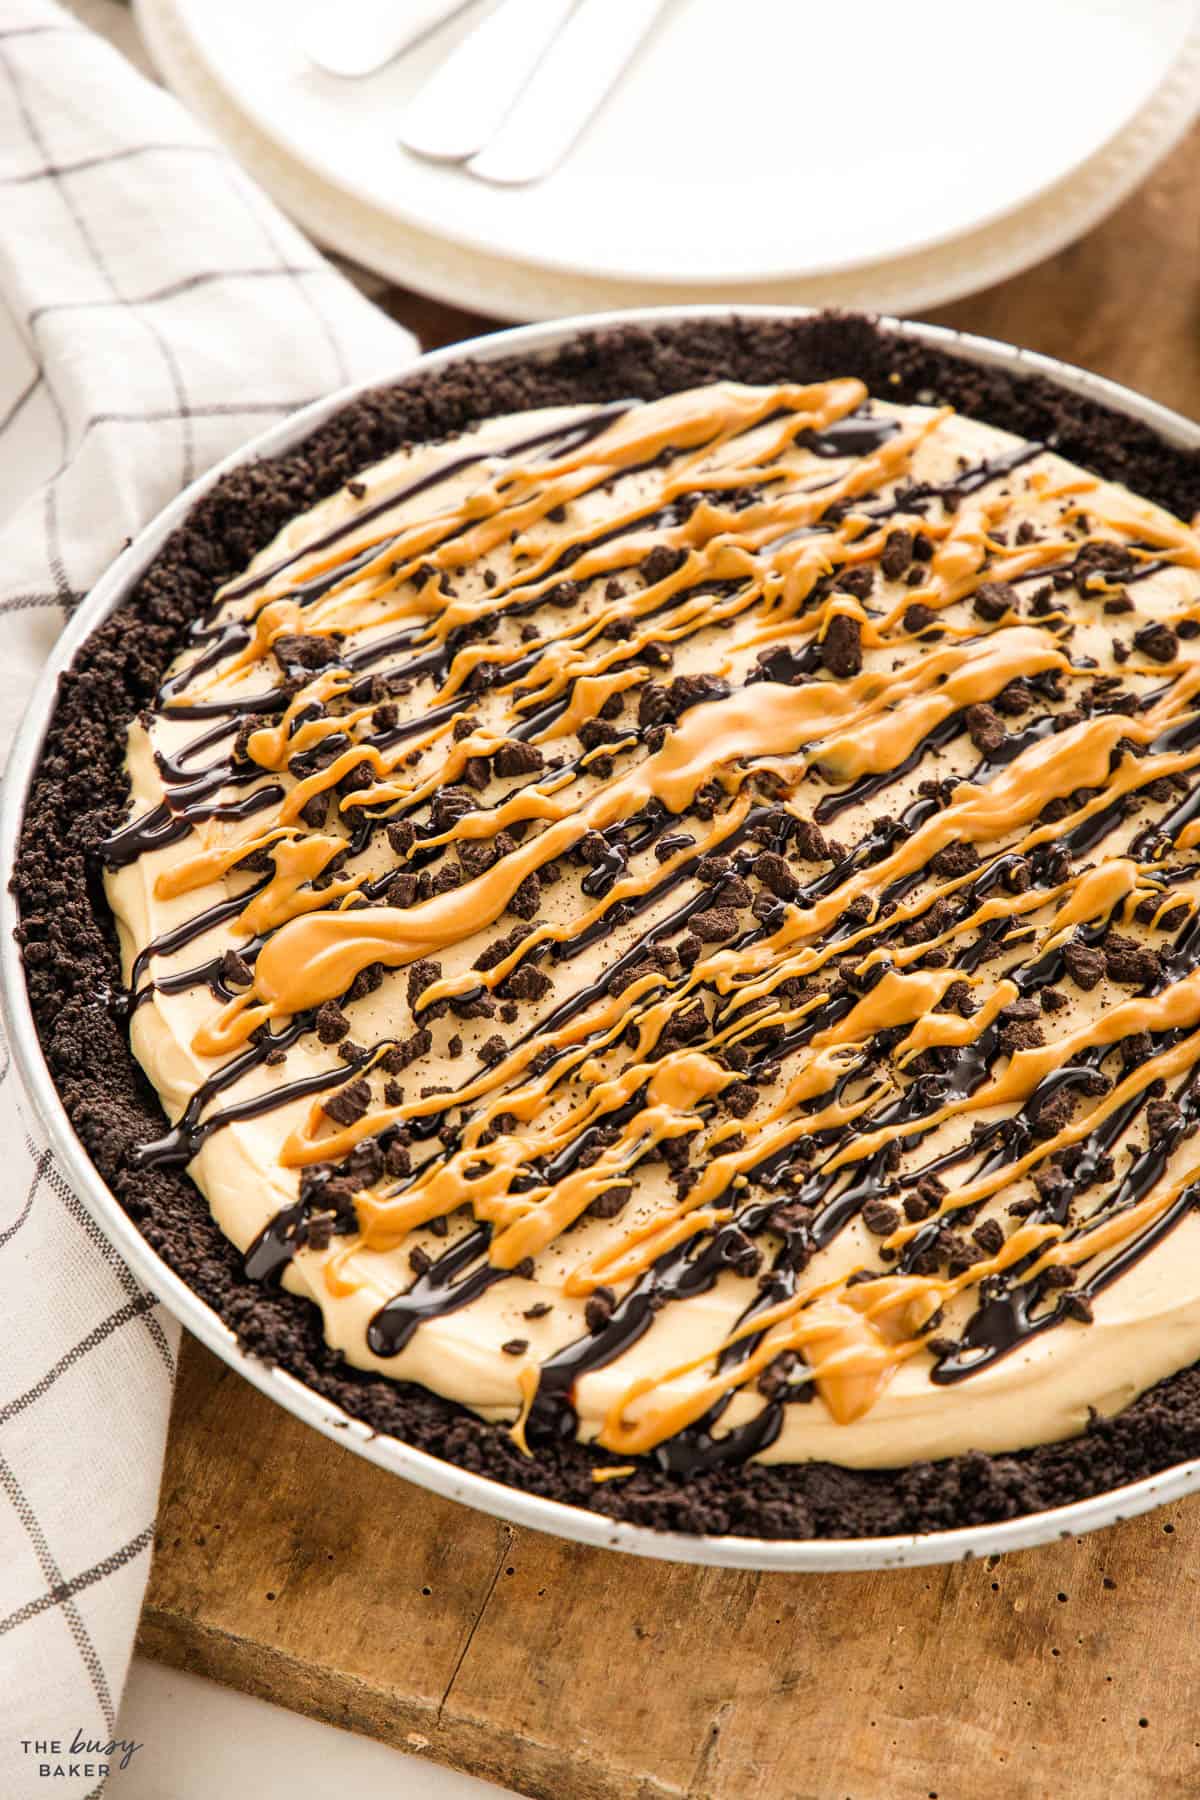 chocolate peanut butter pie topped with chocolate sauce and Oreo crumbs